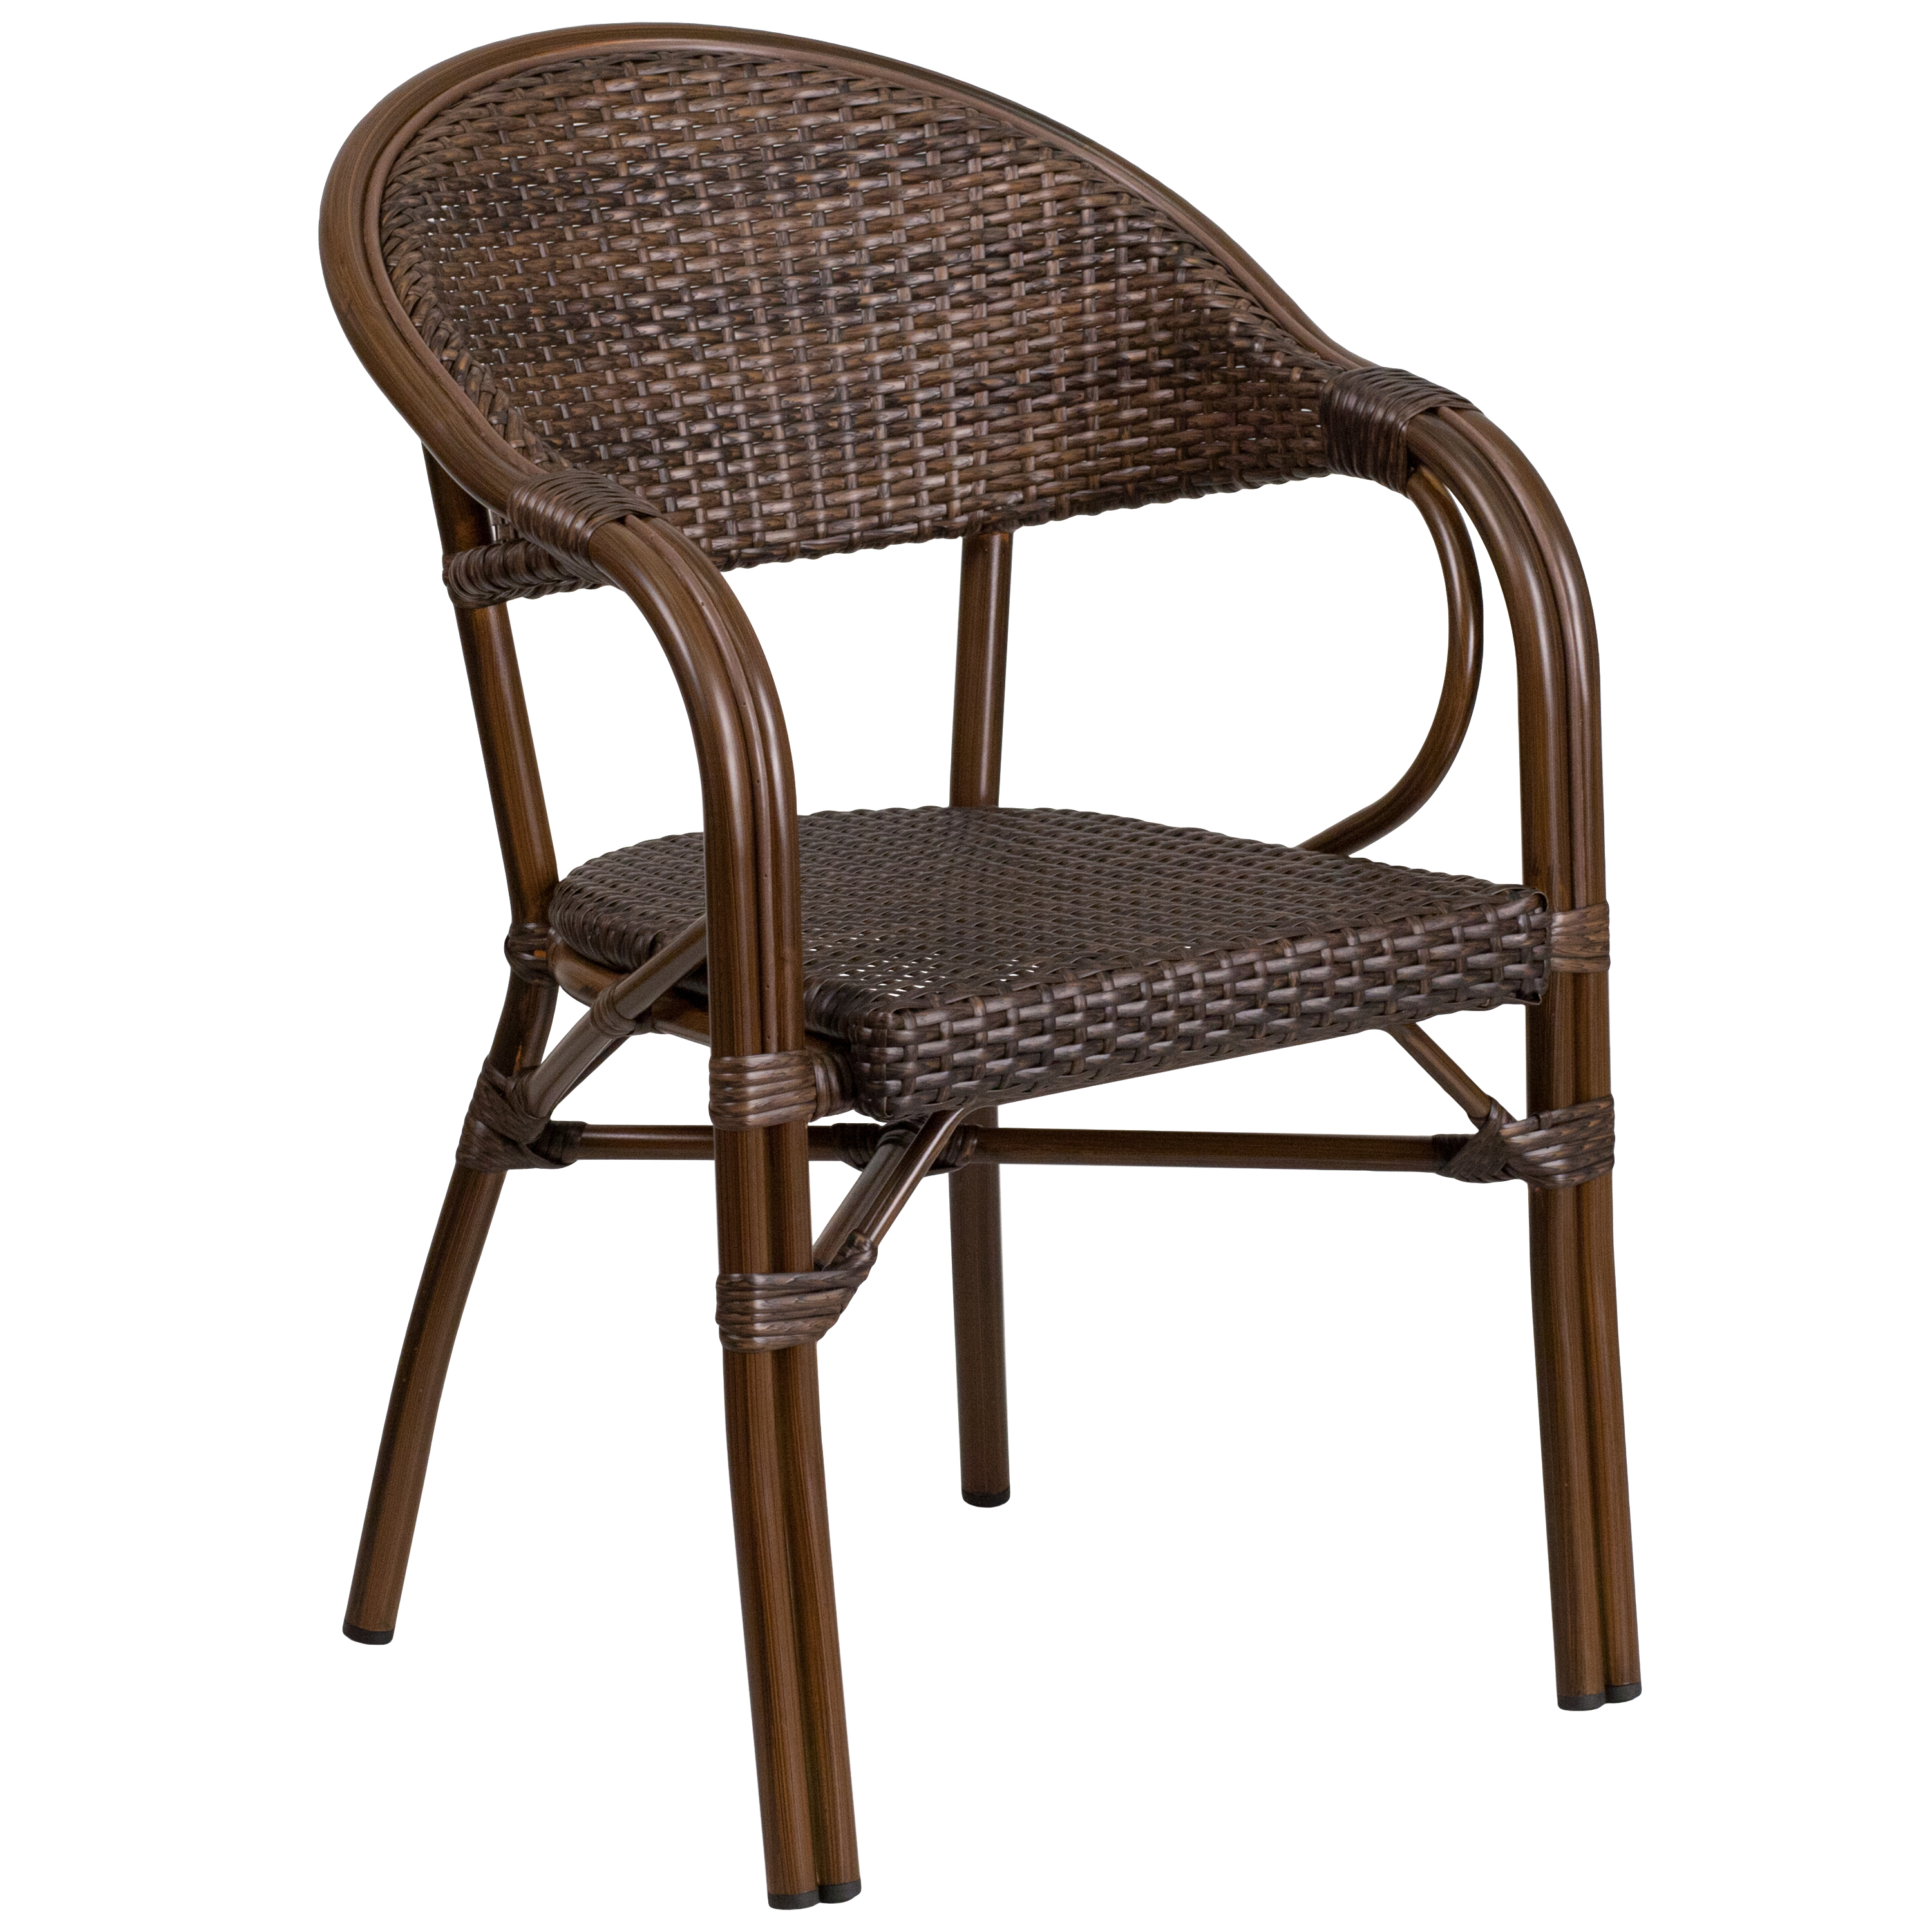 Flash Furniture Milano Series Cocoa Rattan Restaurant Patio Chair with Bamboo-Aluminum Frame - image 2 of 11